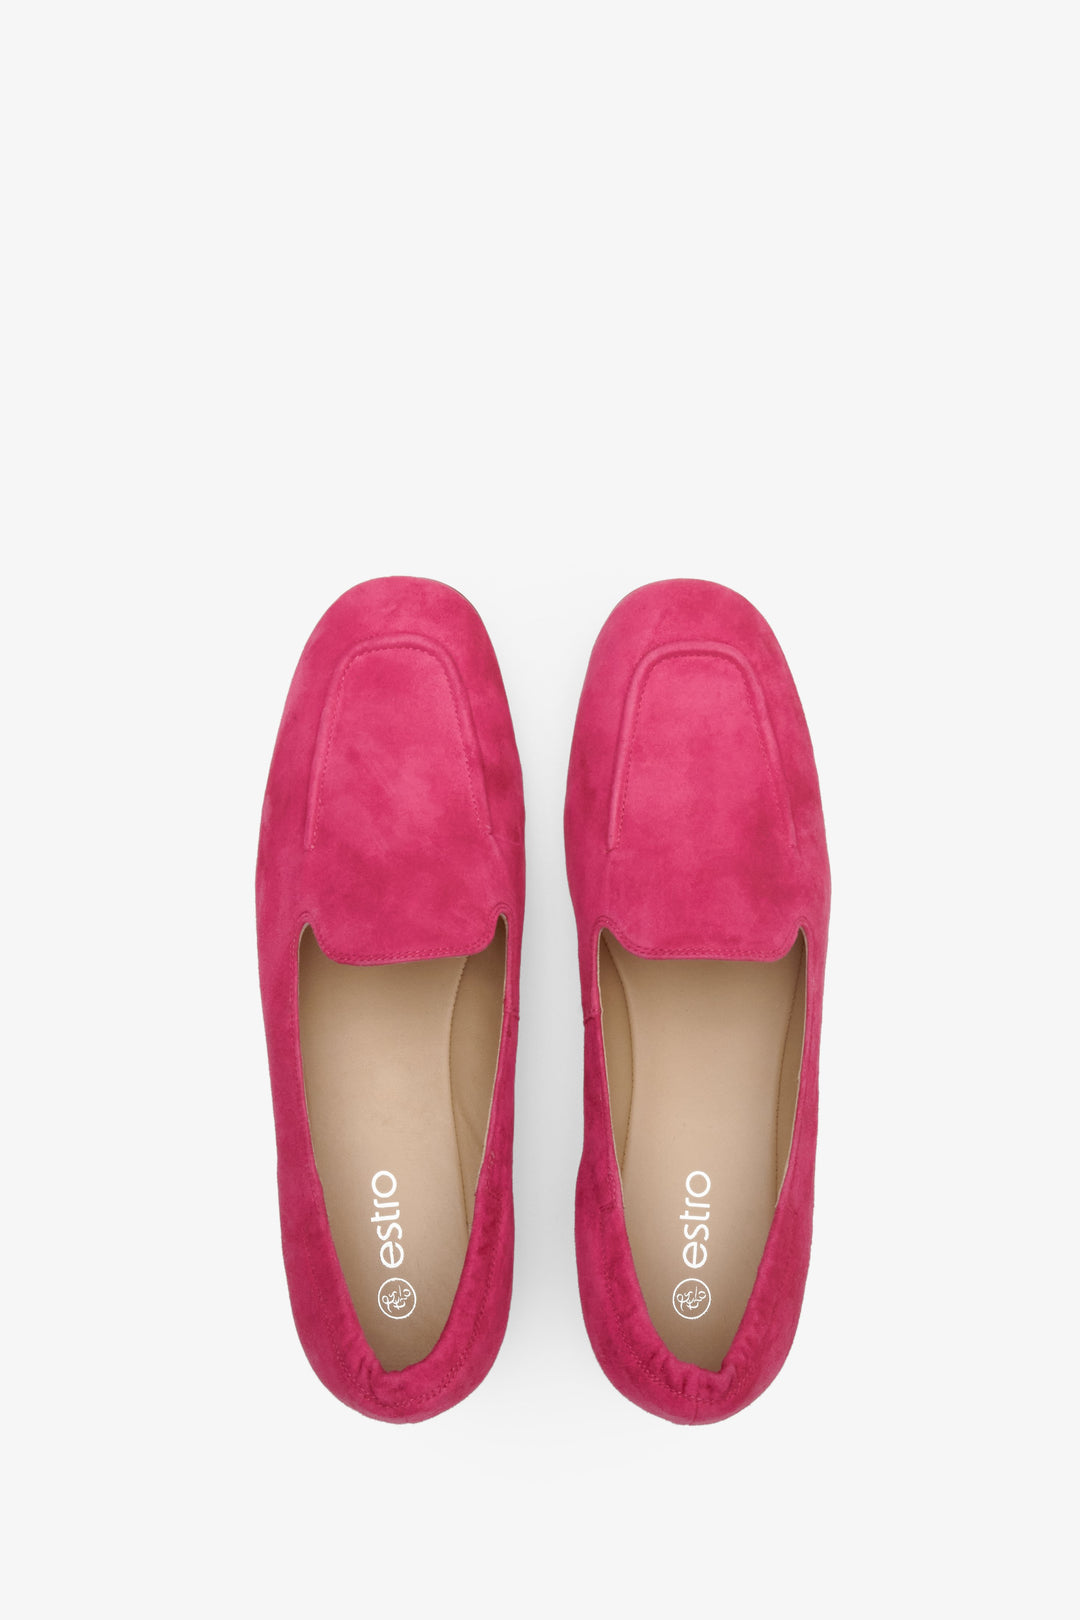 Women's fuchsia Estro moccasins for fall, made of genuine velour - presentation of footwear from above.